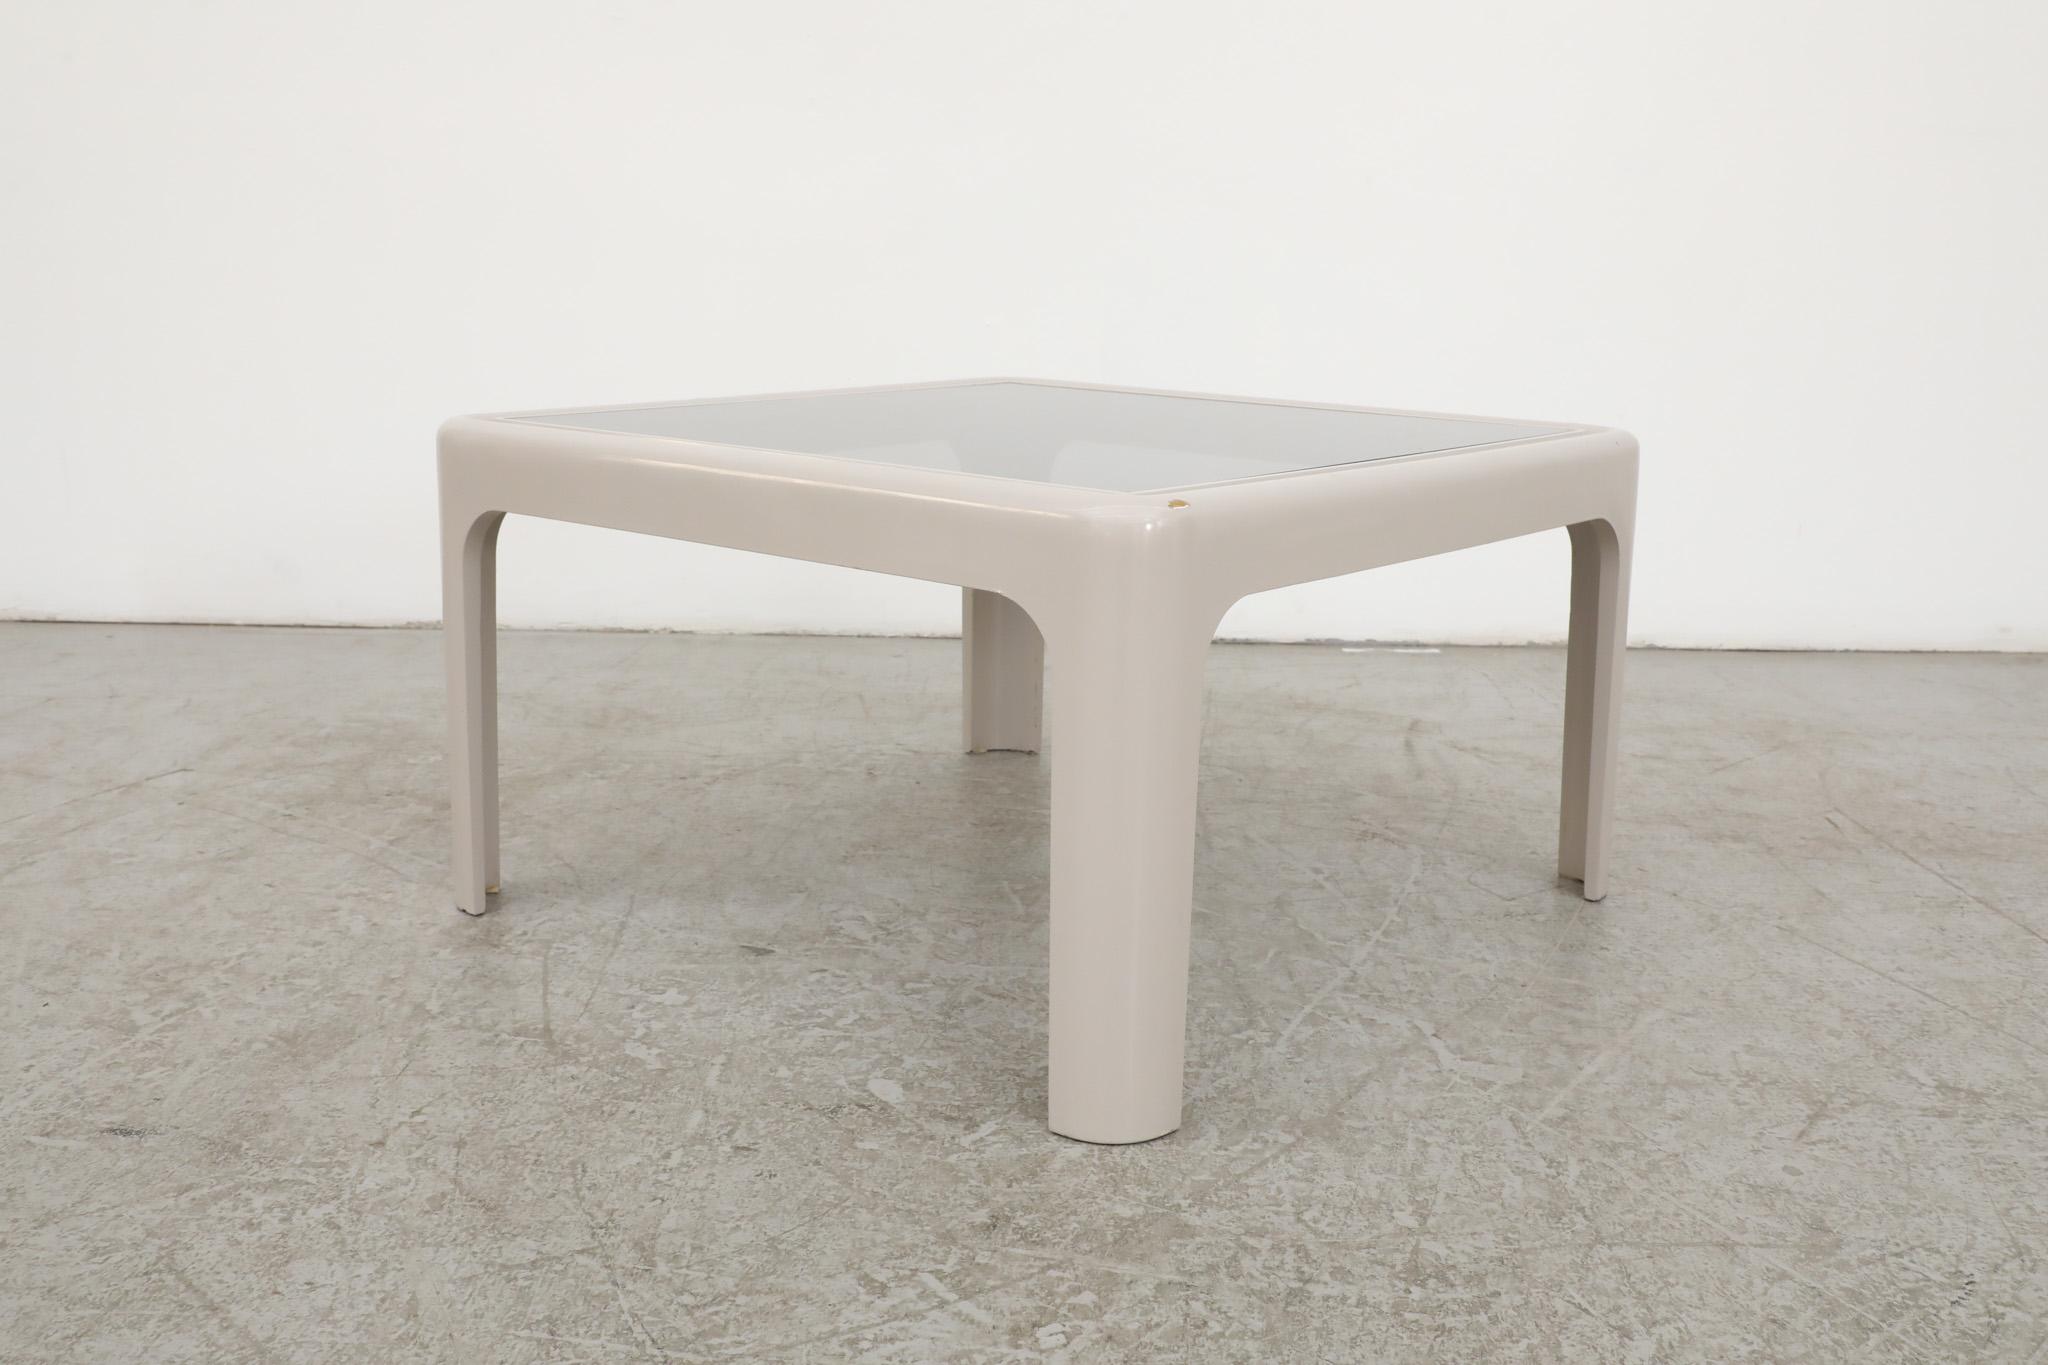 Late 20th Century Poschinger Pur-Möbel Pale Grey and Bronzed Glass Square MOD Acrylic Coffee Table For Sale